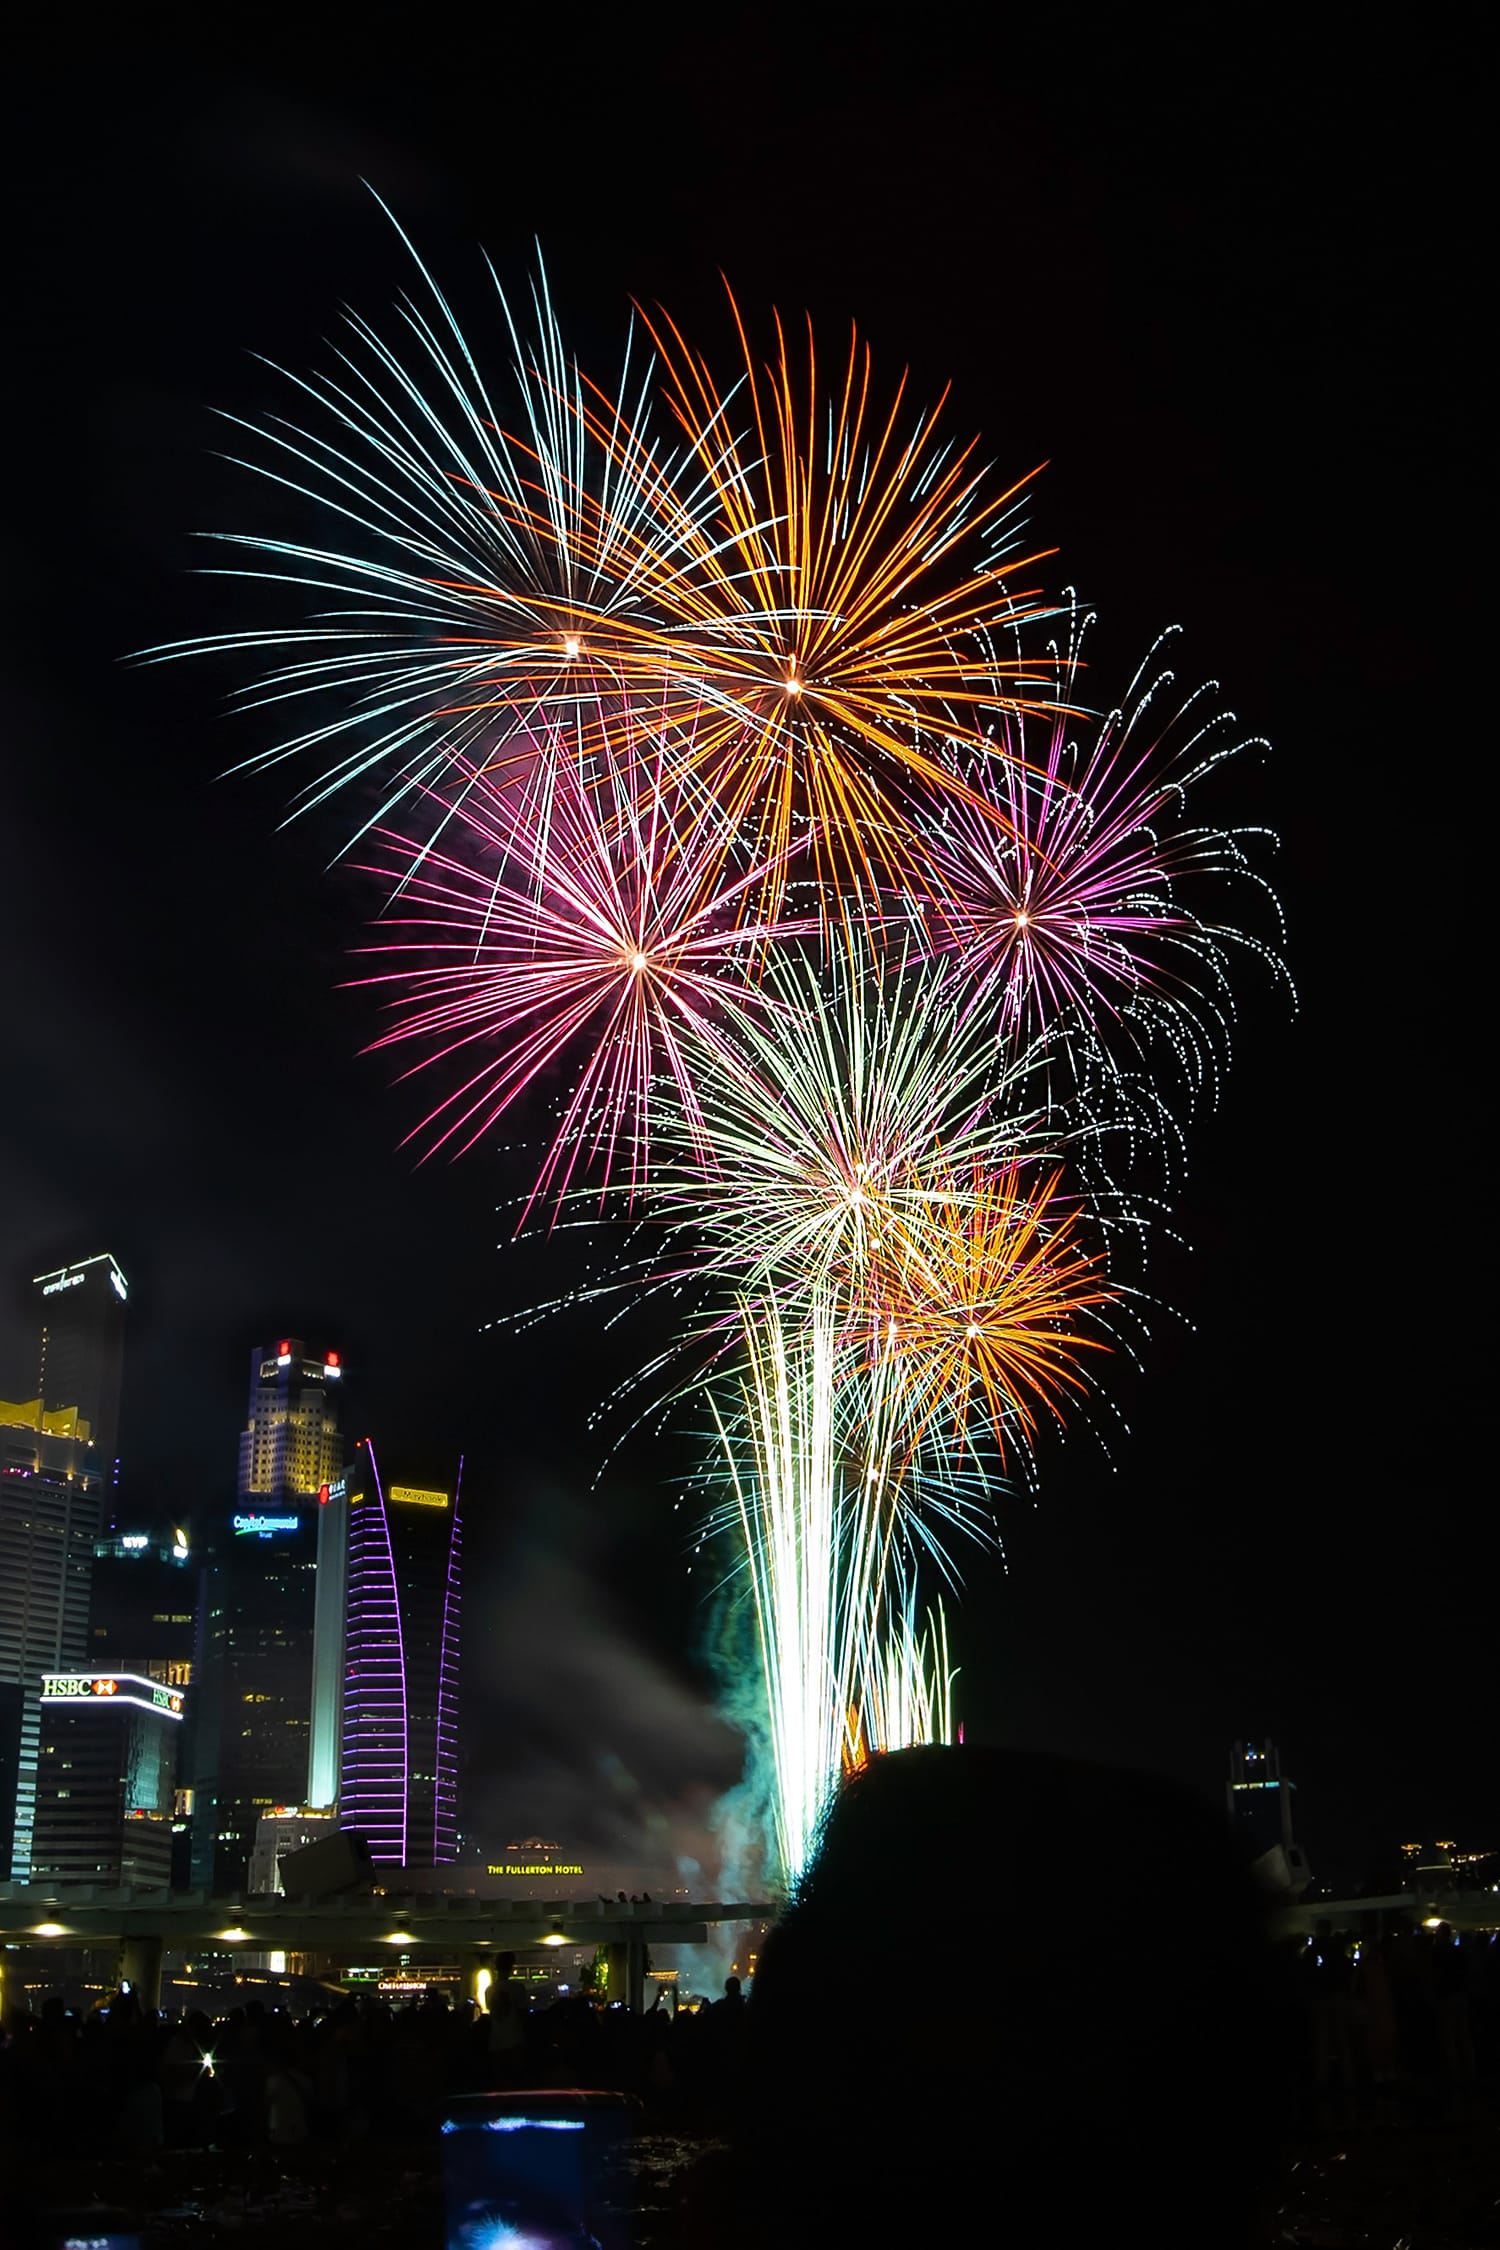 The Ultimate Guide to Photographing Fireworks